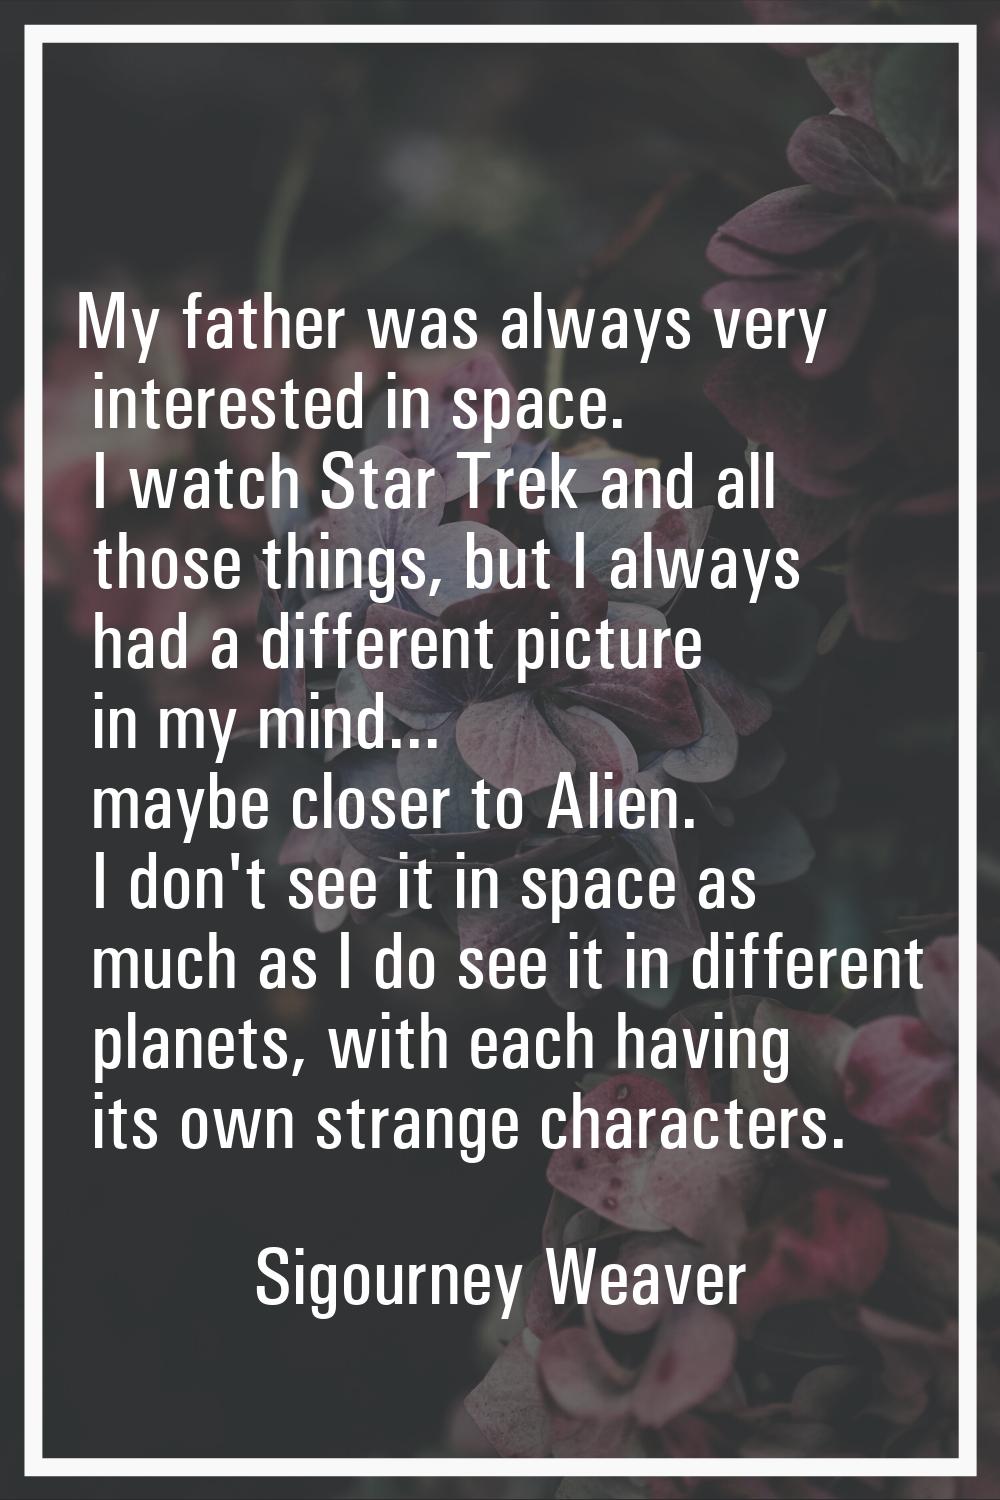 My father was always very interested in space. I watch Star Trek and all those things, but I always